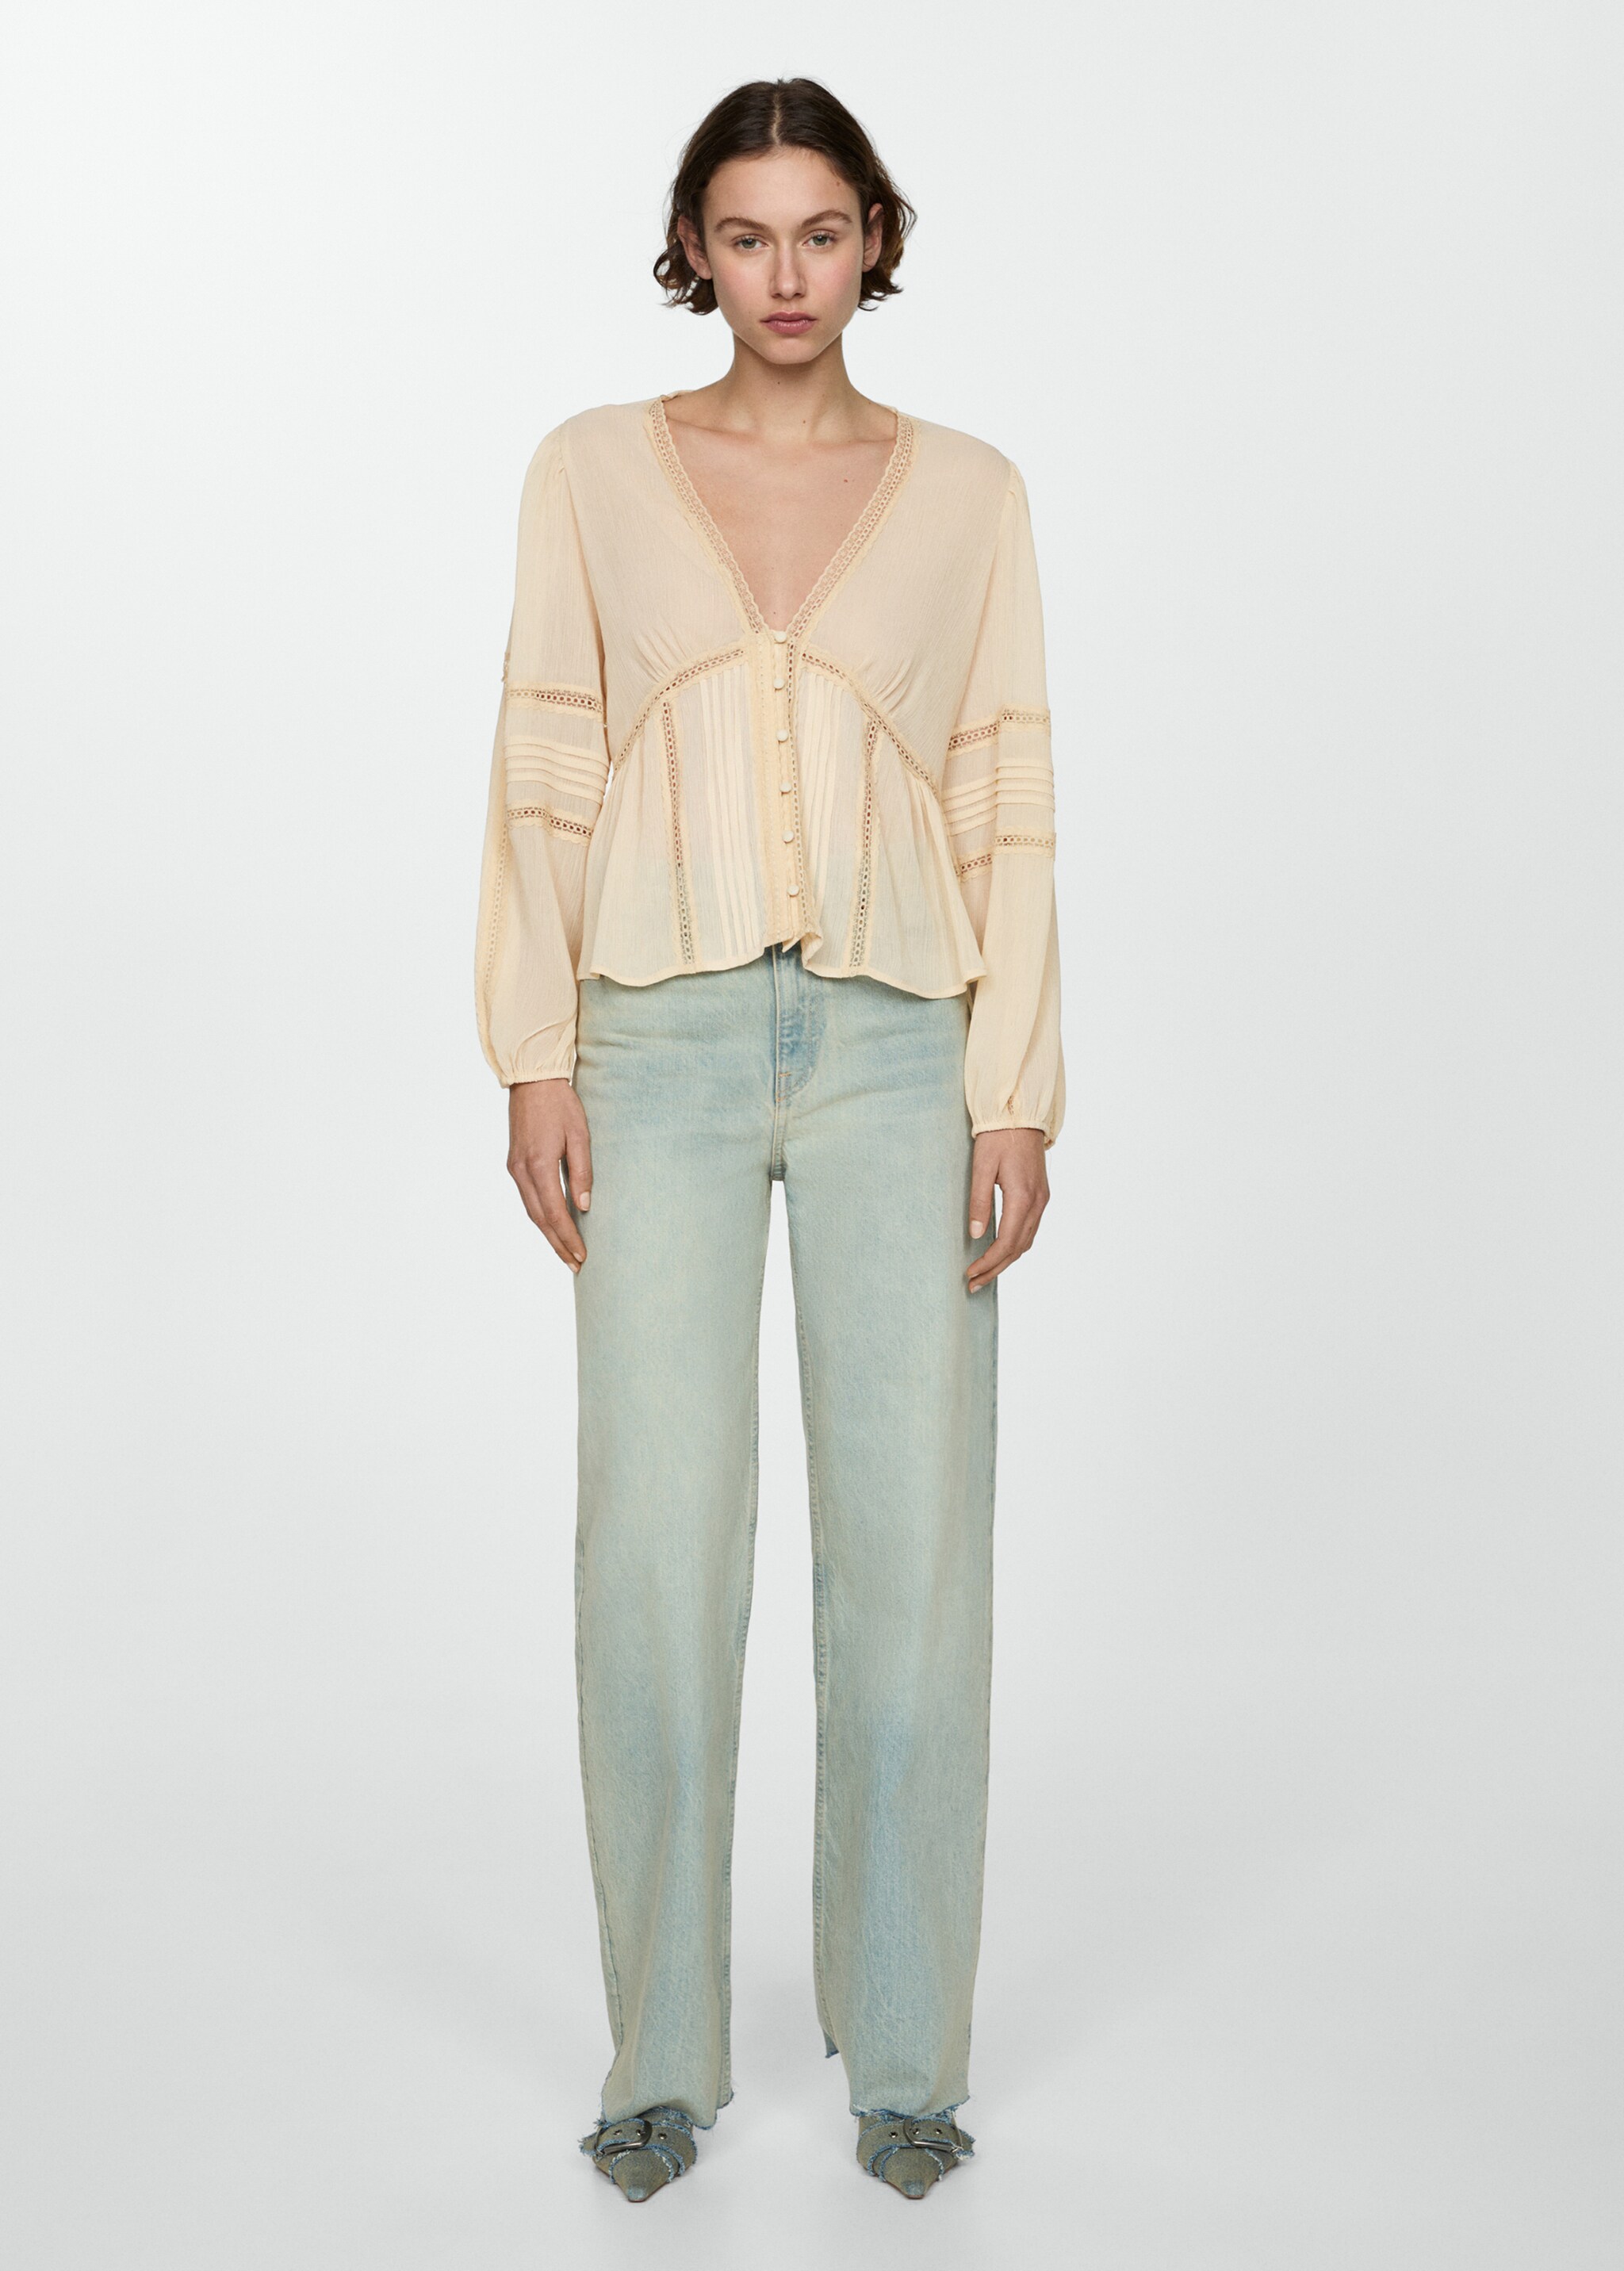 Embroidered flowy blouse - General plane